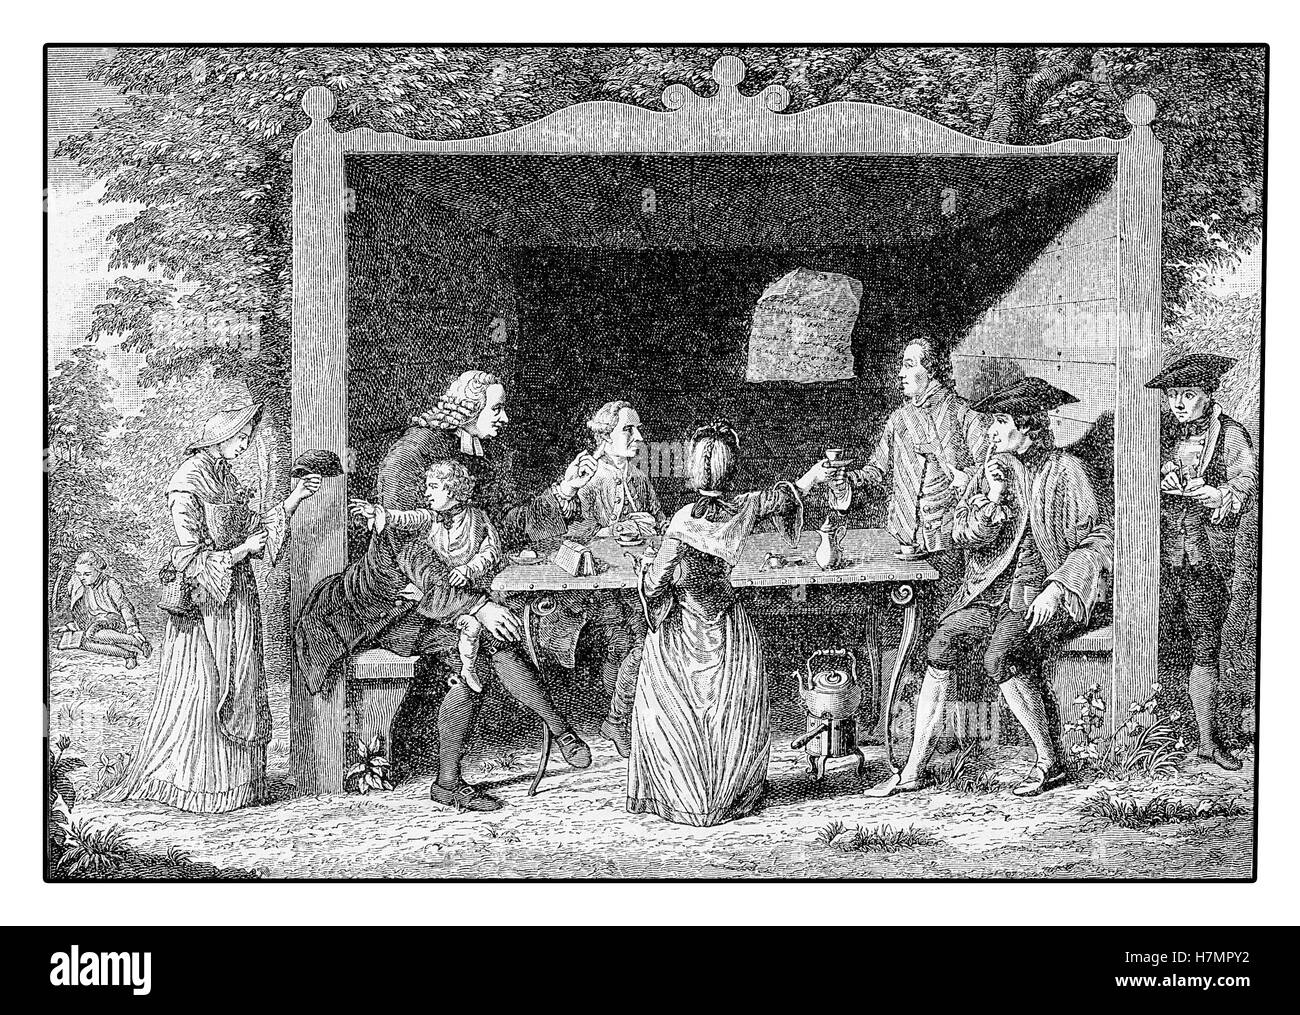 Year 1763, spring trip to the countryside,  happy company drinking and chatting leisurely Stock Photo